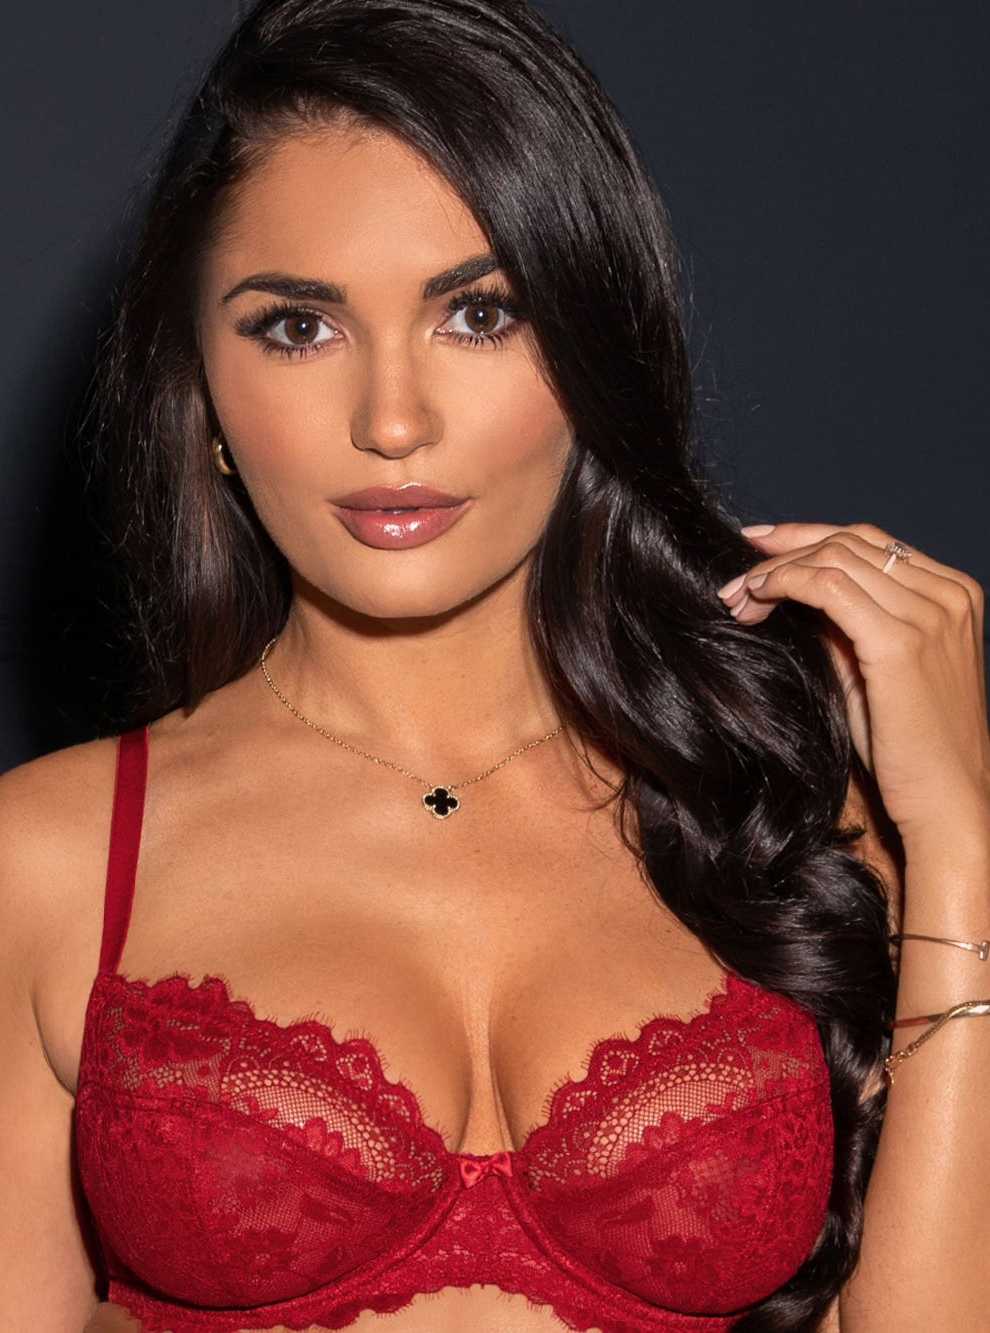 Former Love Island contestent and model India Reynolds shares her top lingerie tips (Pour Moi/PA)